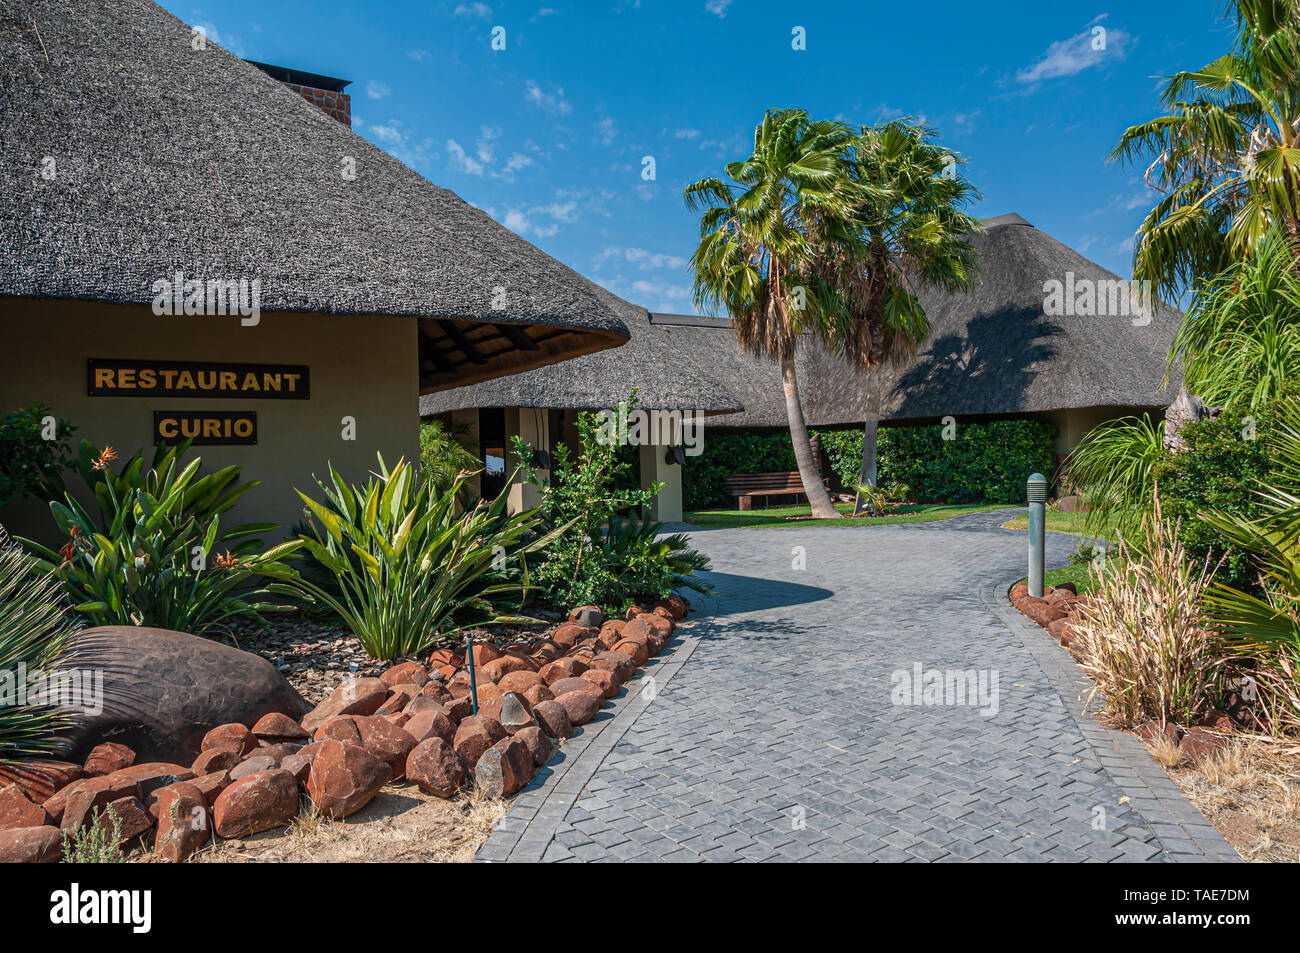 Restaurant and curios at Erindi Private Game Reserve in Namibia. Stock Photo